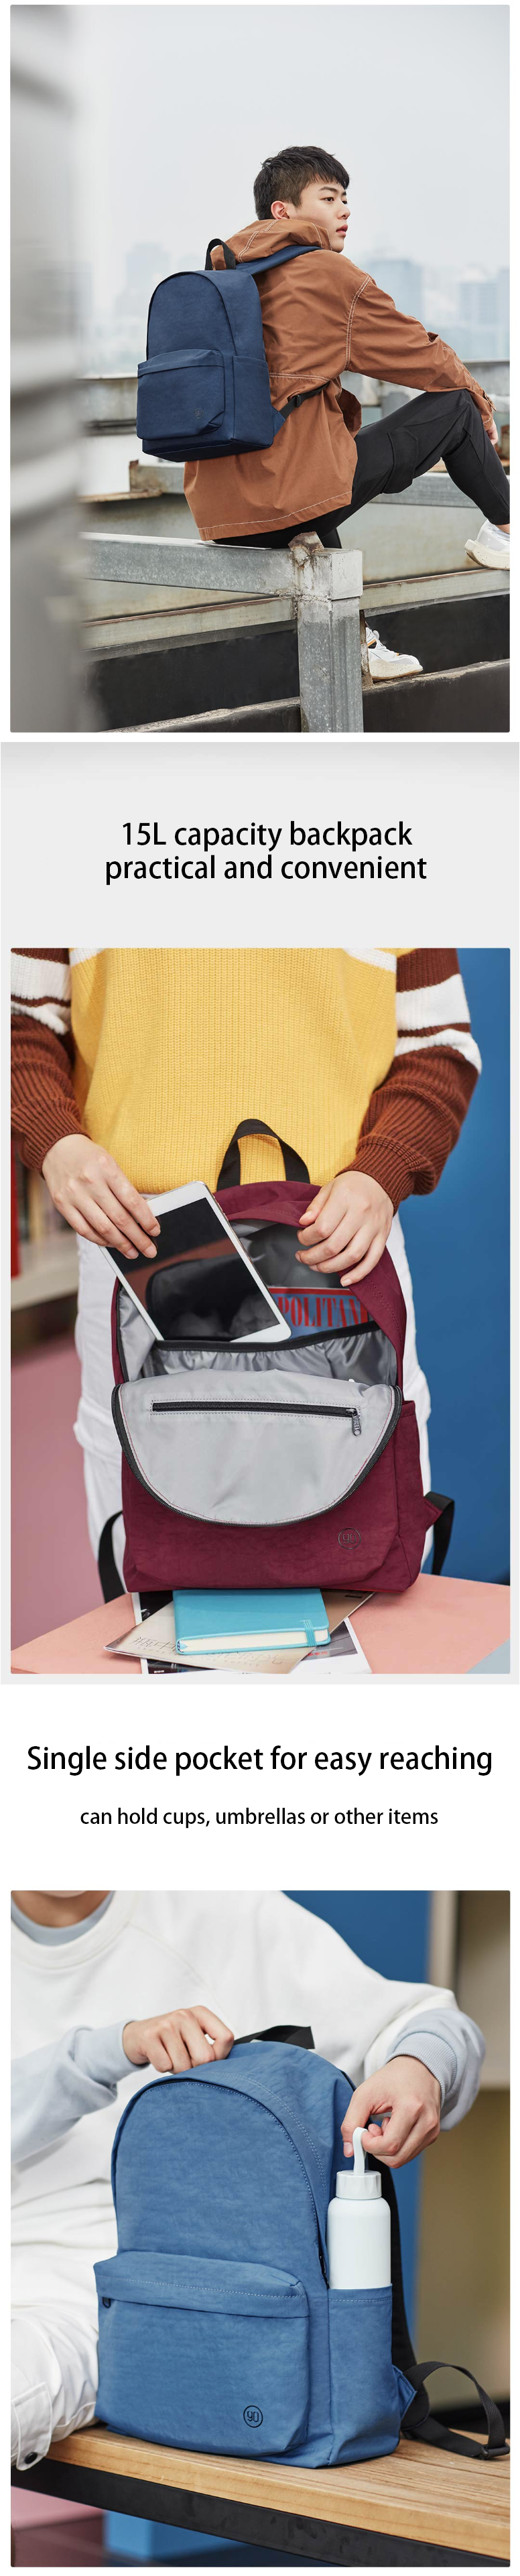 90-FUN-Youth-College-Backpack-Shoulder-Laptop-Bag-from-Youpin-1555111